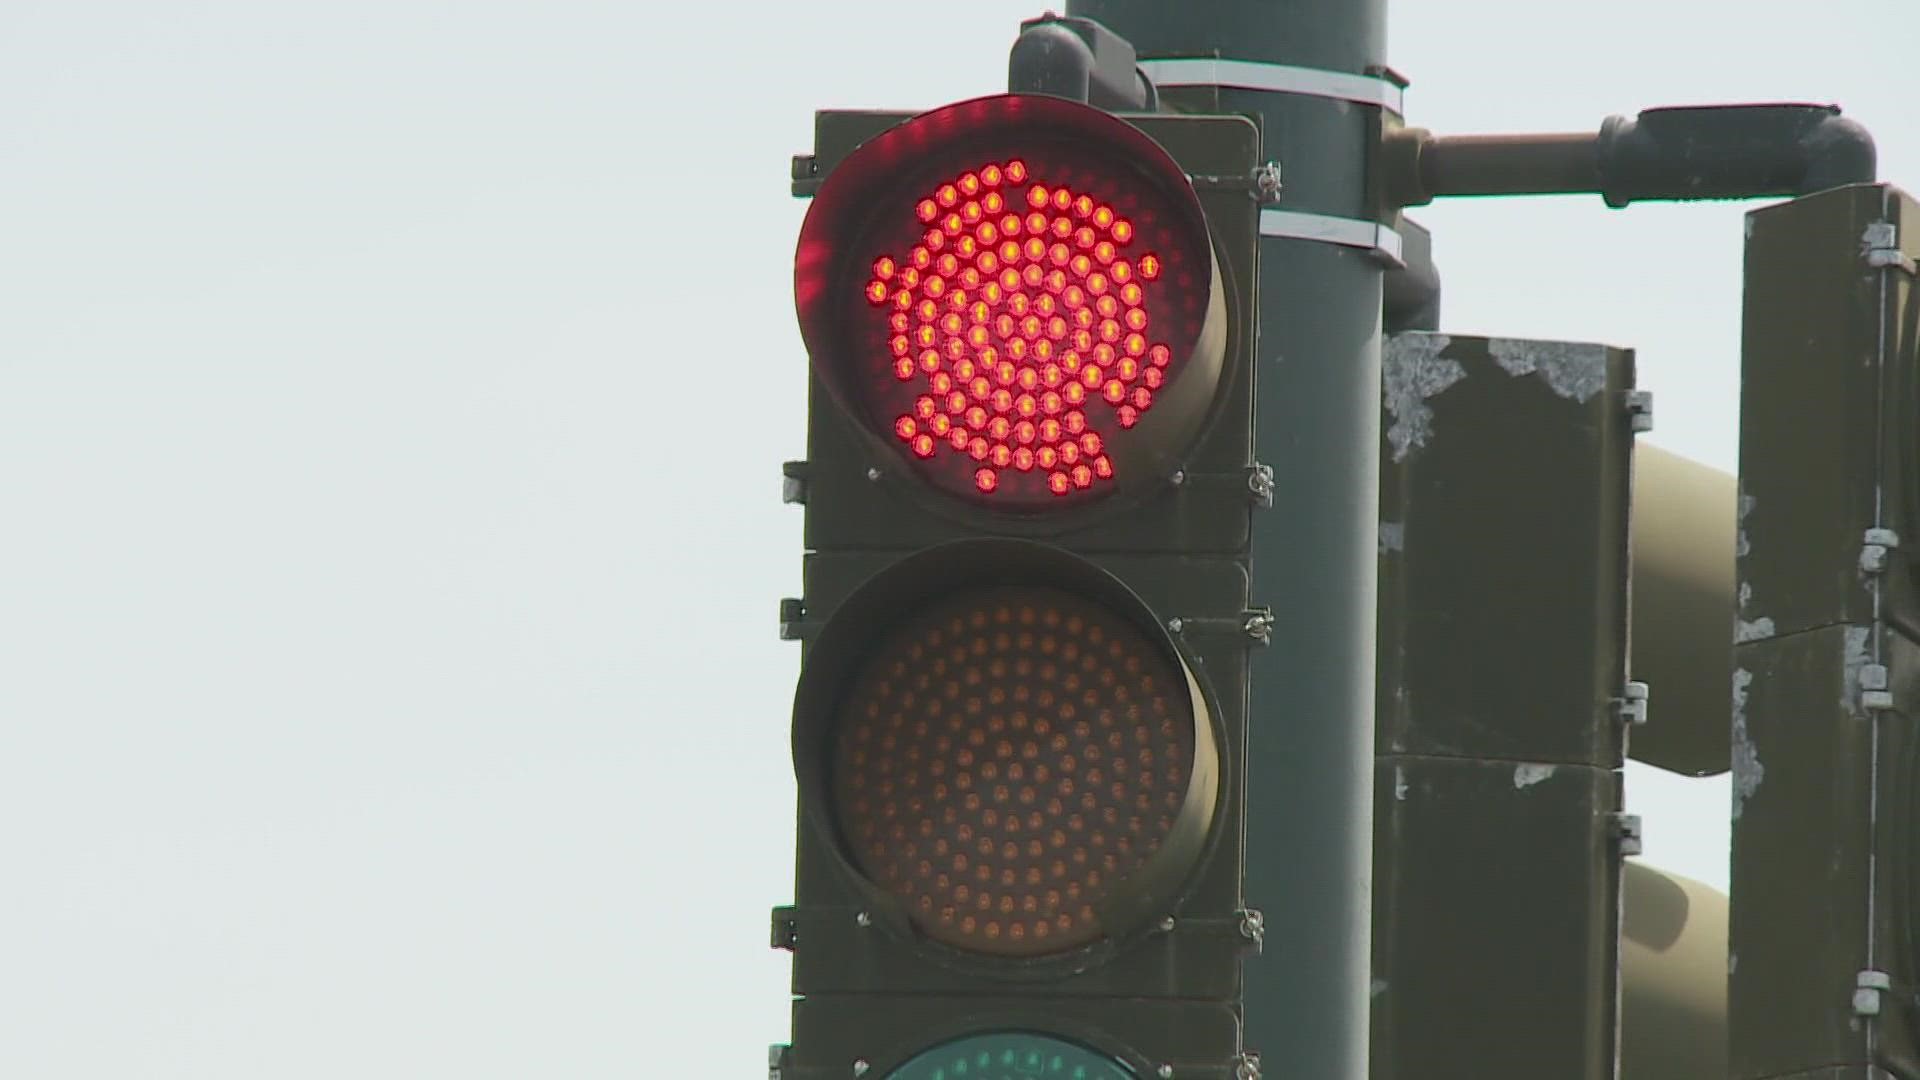 Blinking, broken red traffic lights are a concern for confused local drivers in New Orleans